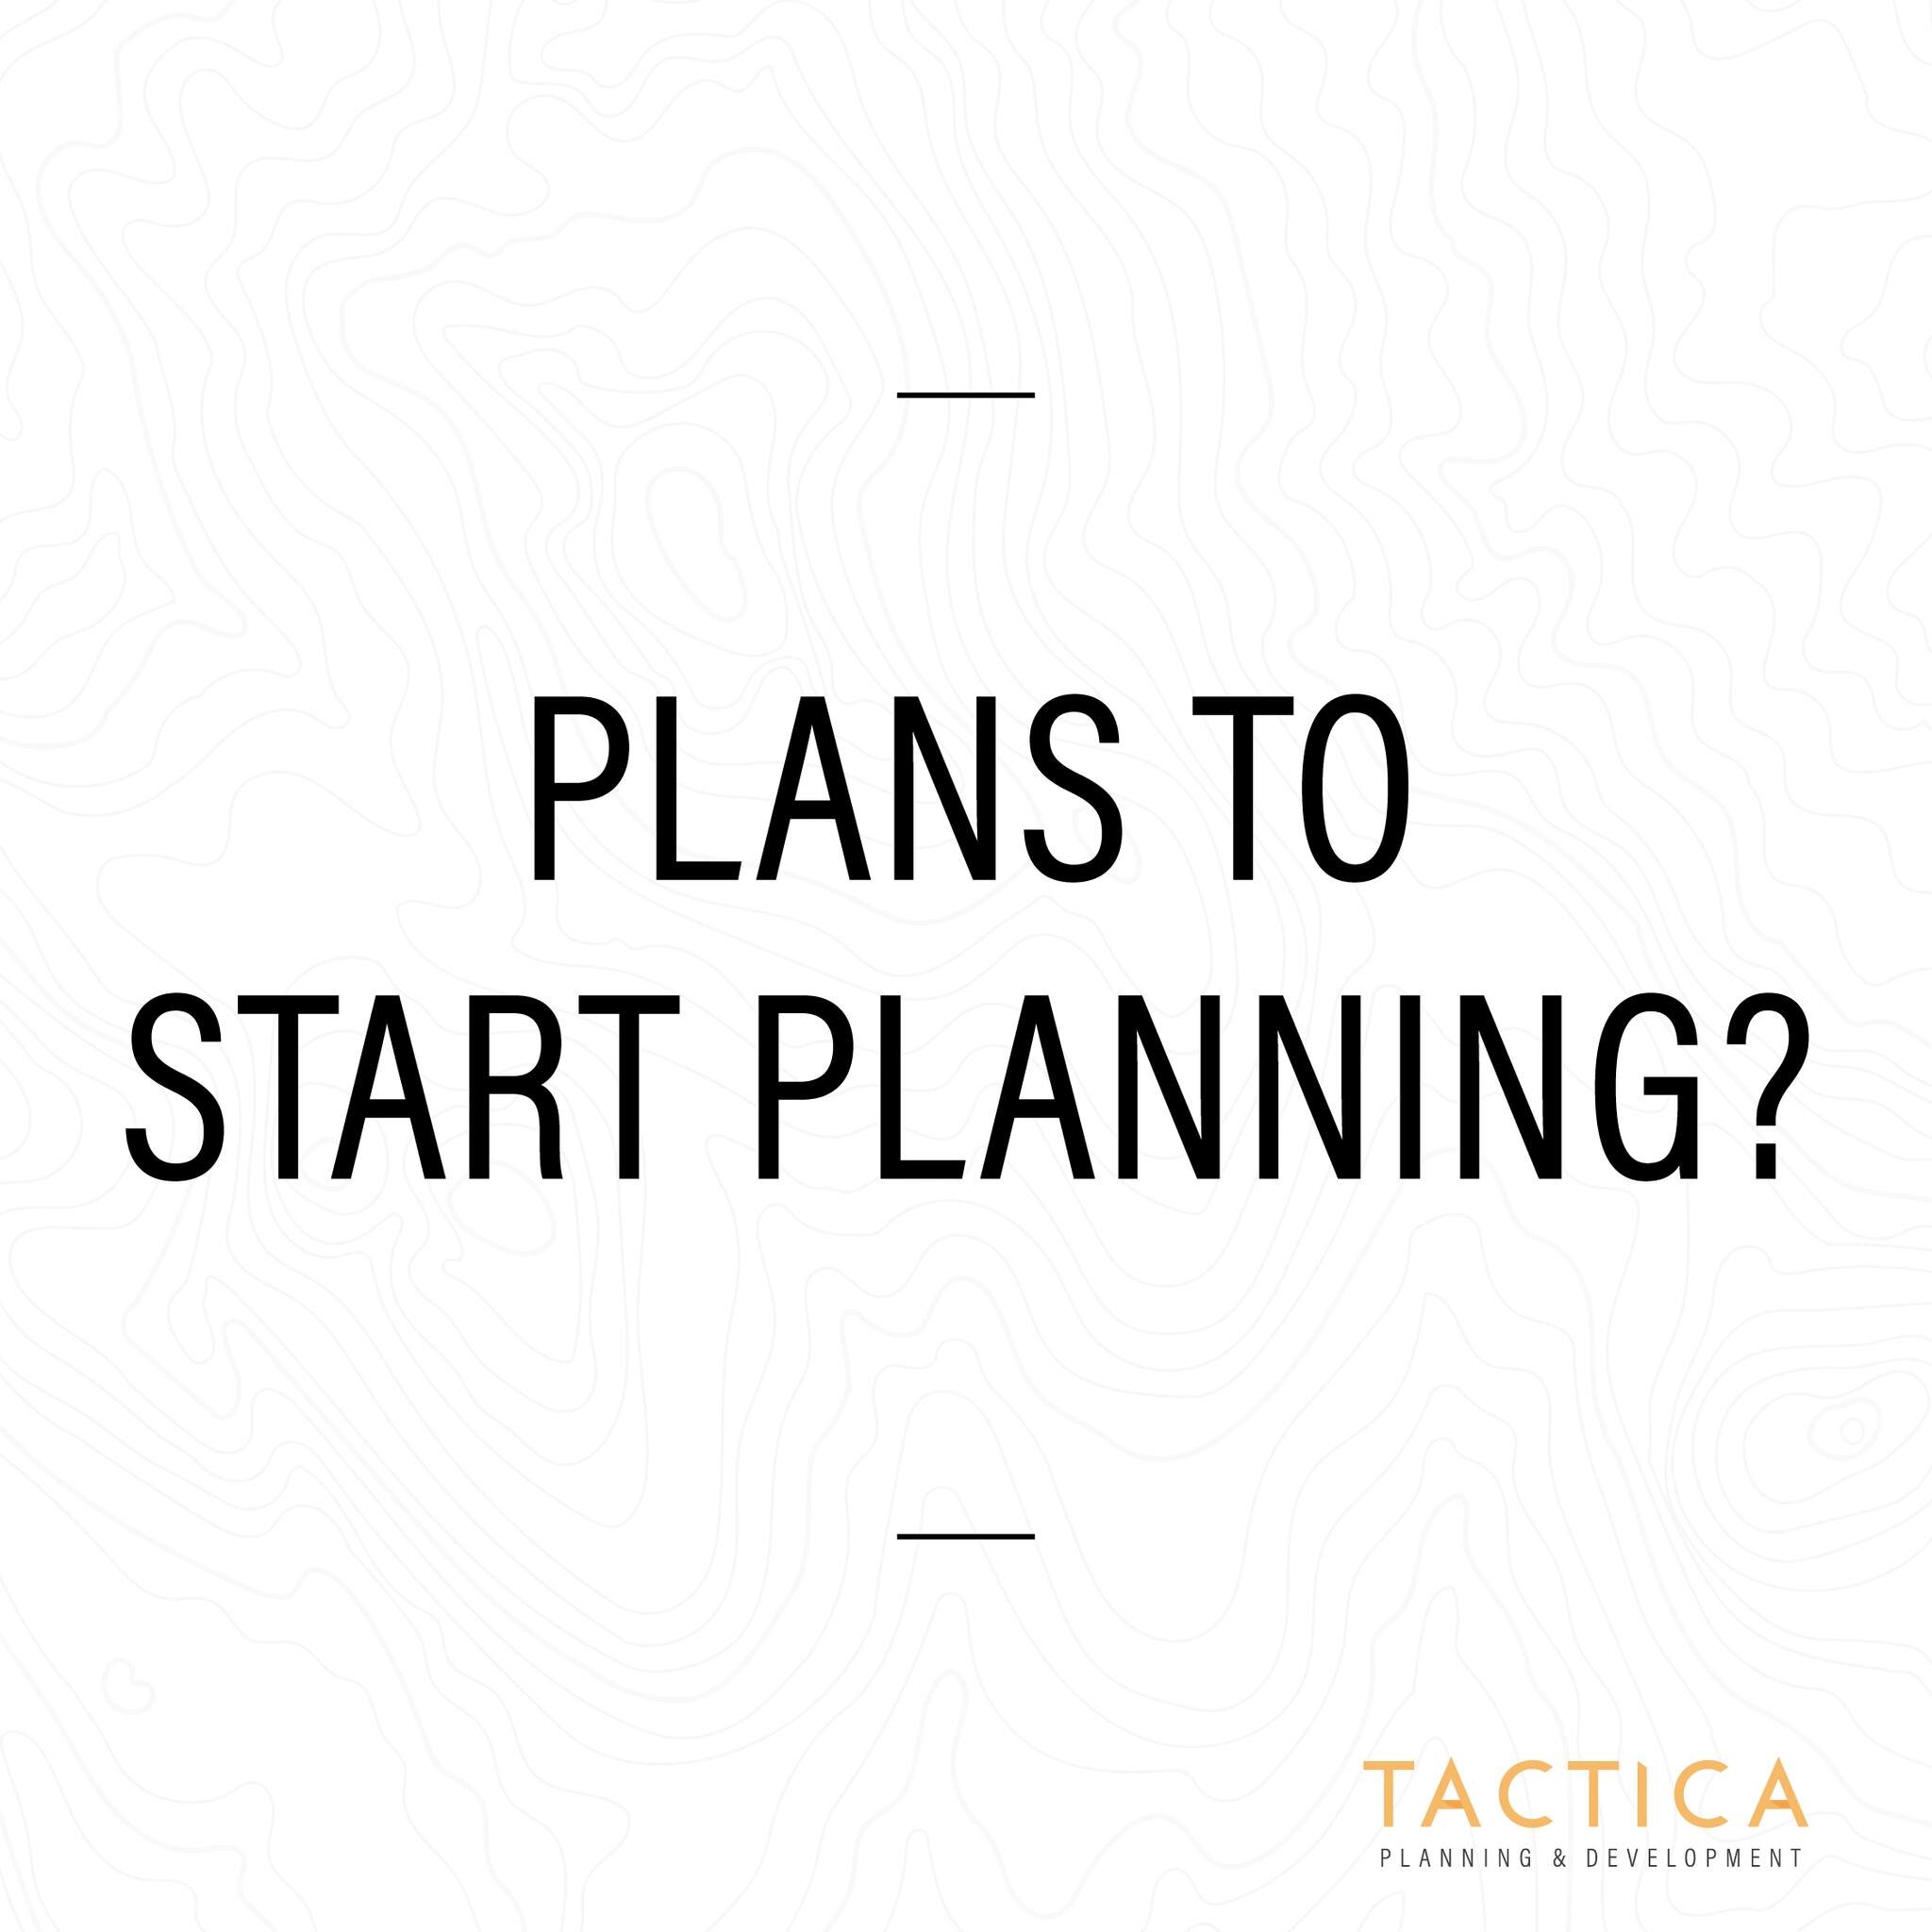 Our Gold Coast-based team of expert town and urban planners are experienced in preparing all types of development applications. We keep up-to-date with the latest planning laws and regulations, so you can be confident your application will comply wit